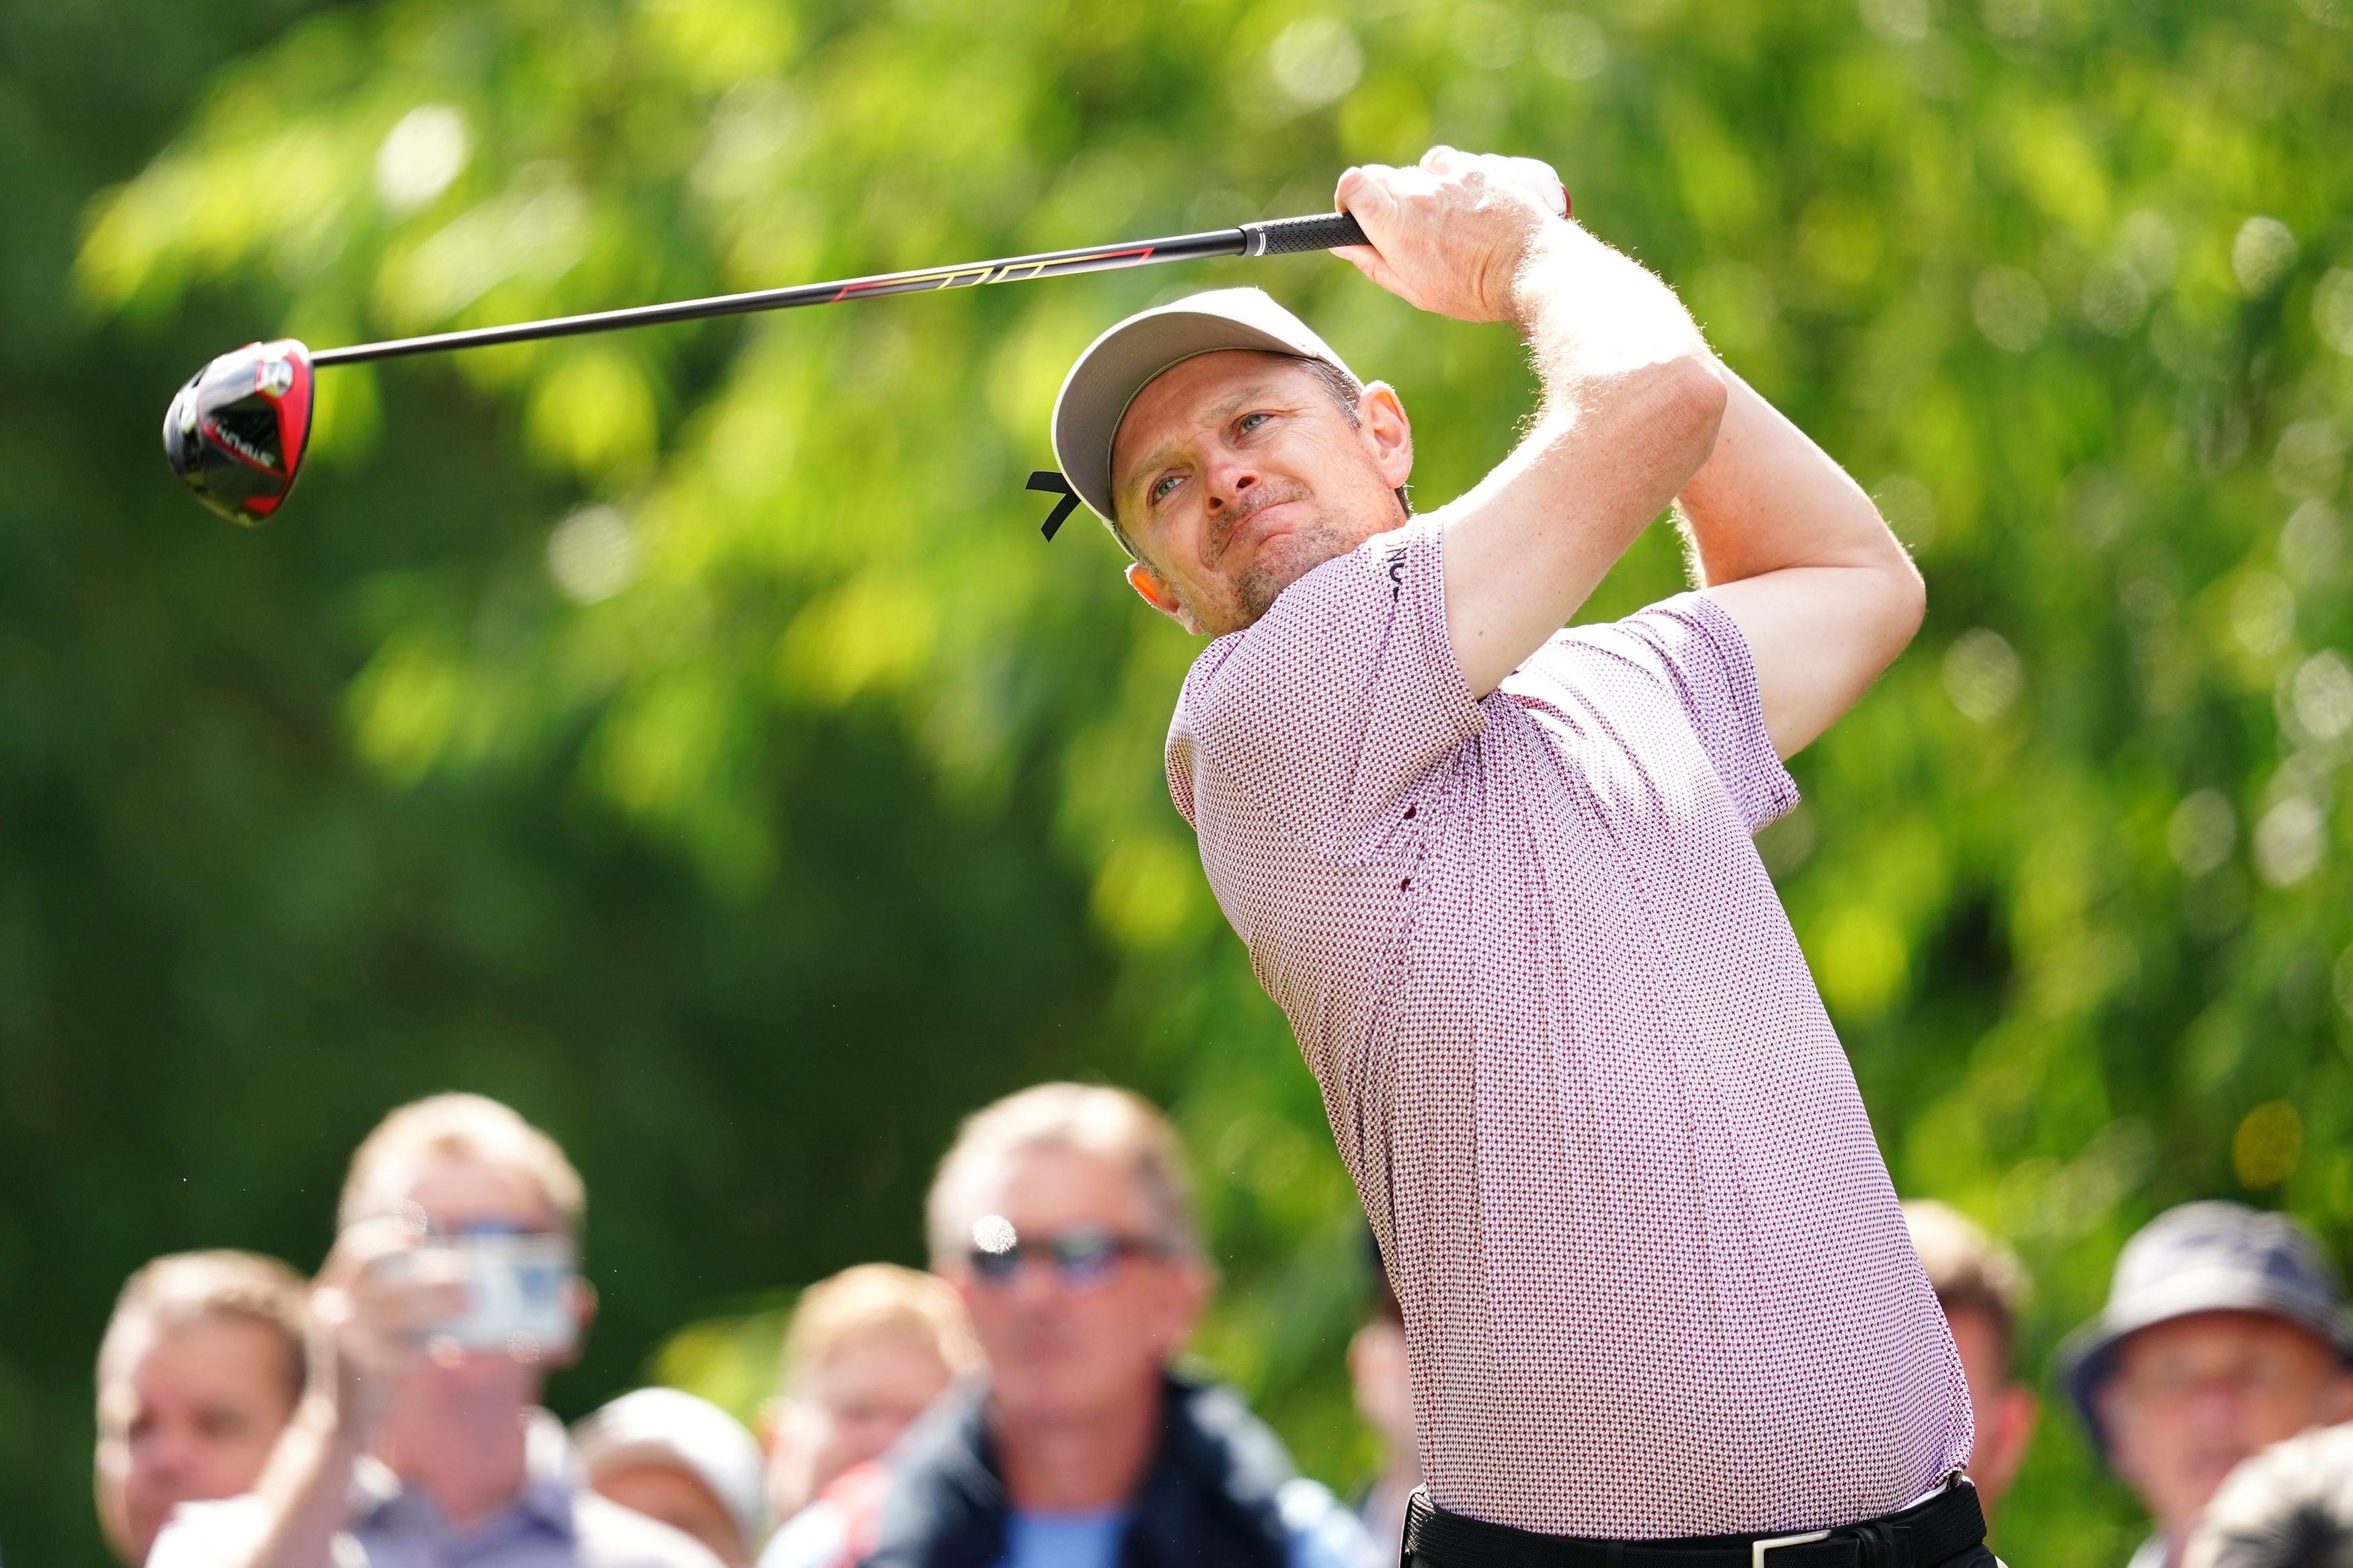 Justin Rose has a one shot lead in the British Masters after the first round